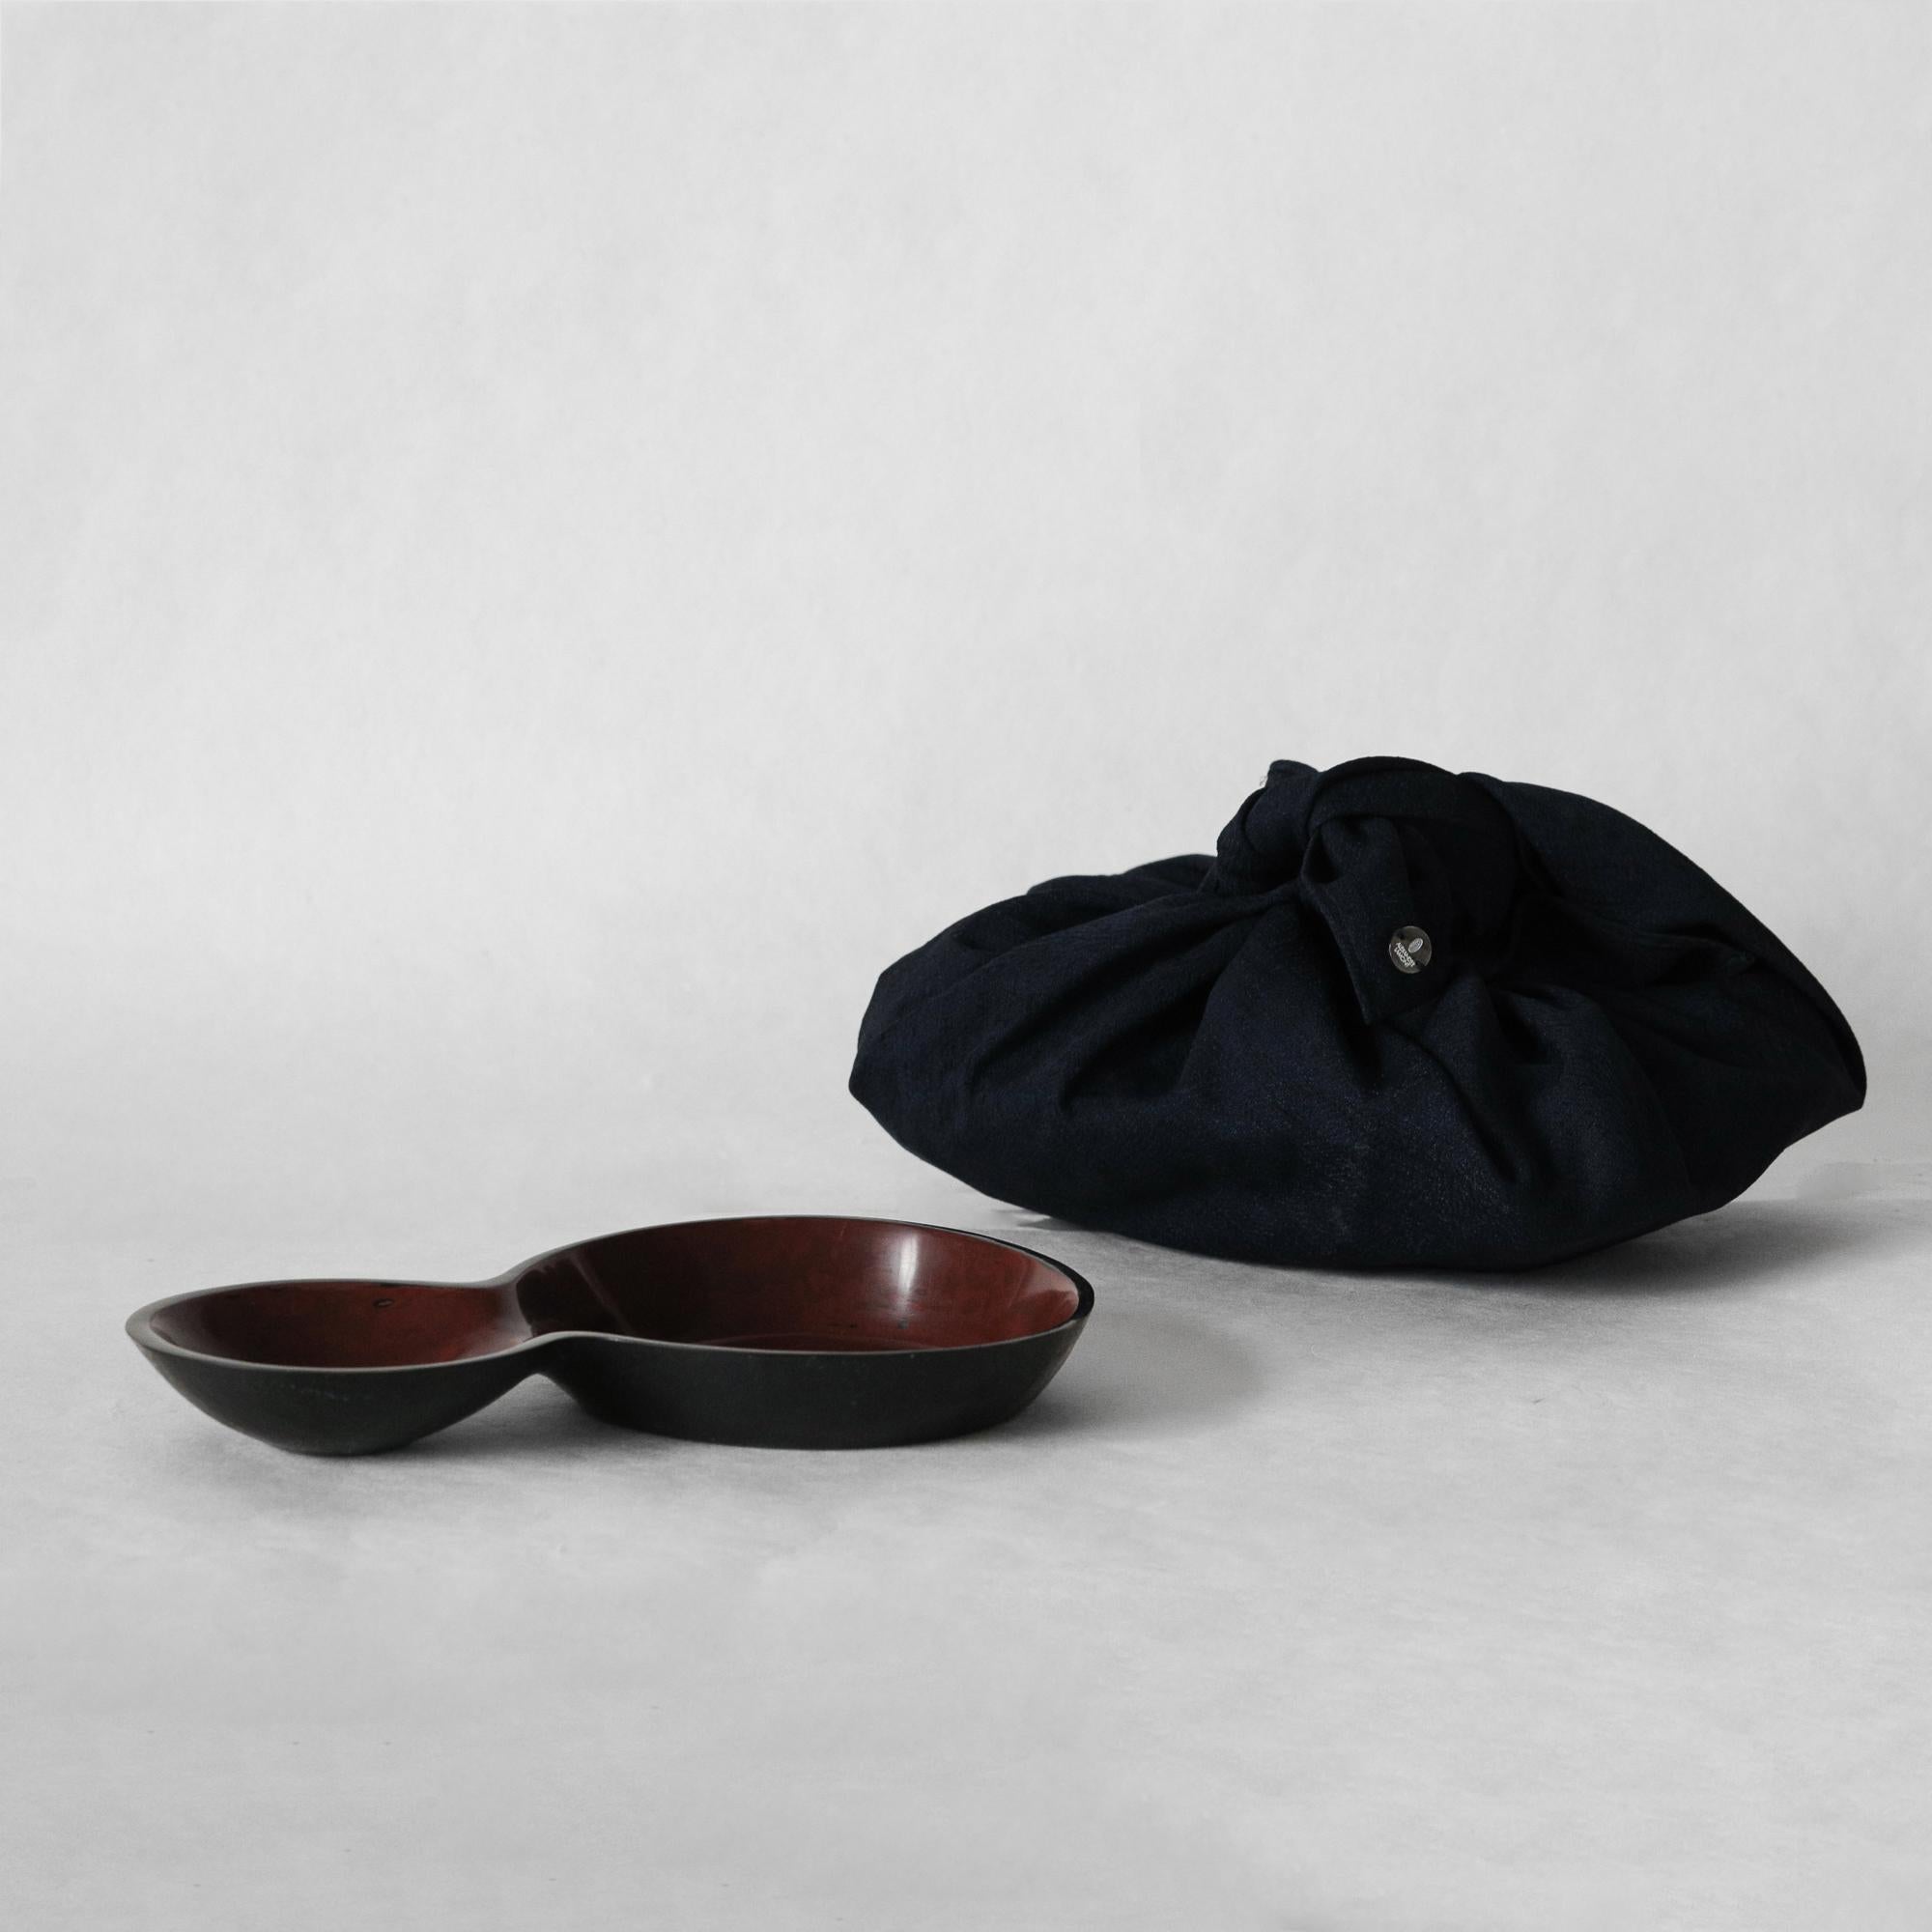 Lacquered Urushi Cinnabar Red & Black Lacquer Gourd Calaba Long Bowl by Alexander Lamont For Sale